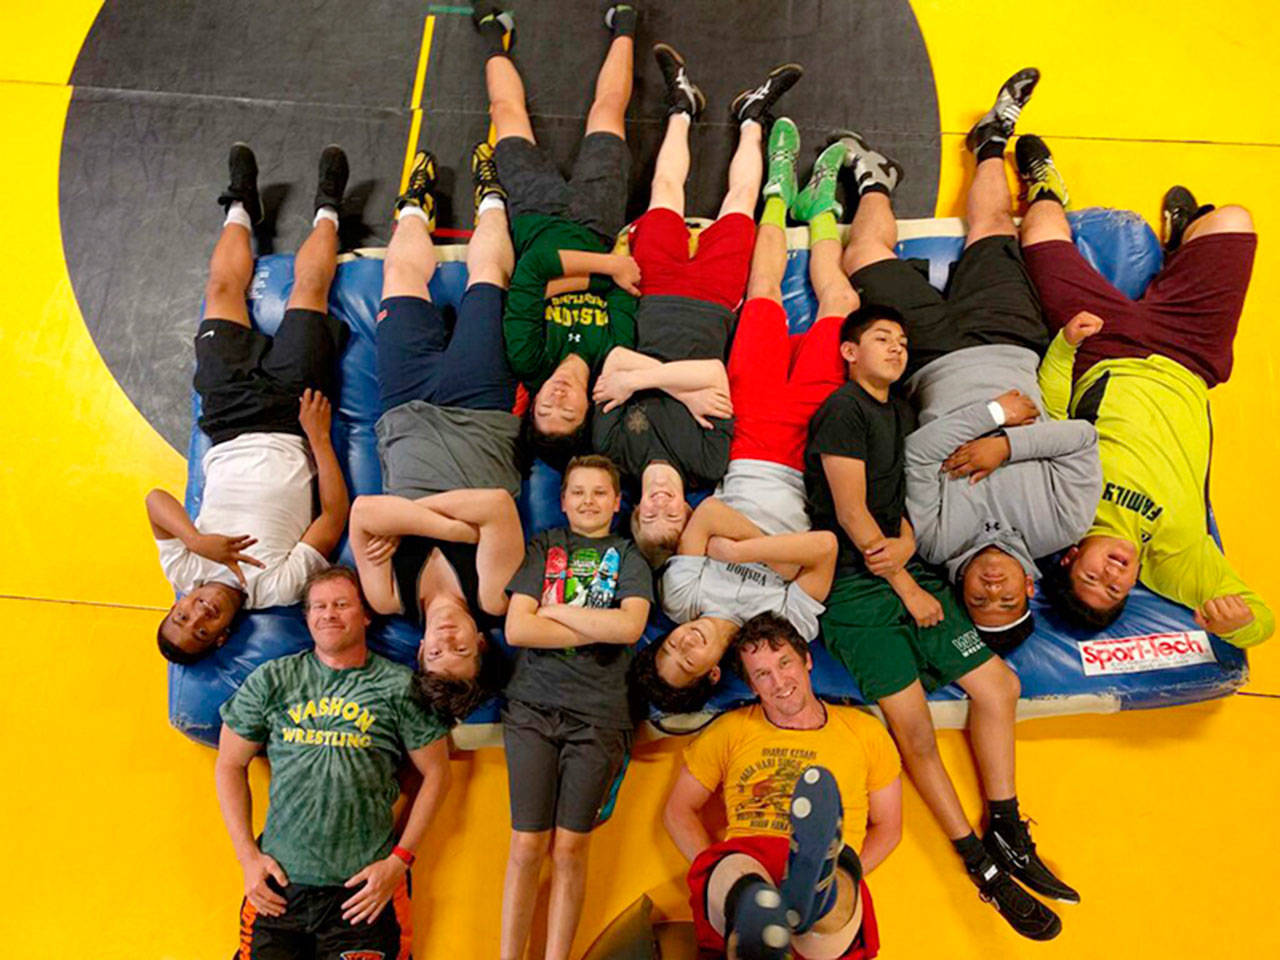 Anders and Per Lars Blomgren, left and right at the bottom of the photo, having some fun with wrestlers during a summer training session in 2017 (Courtesy Photo).